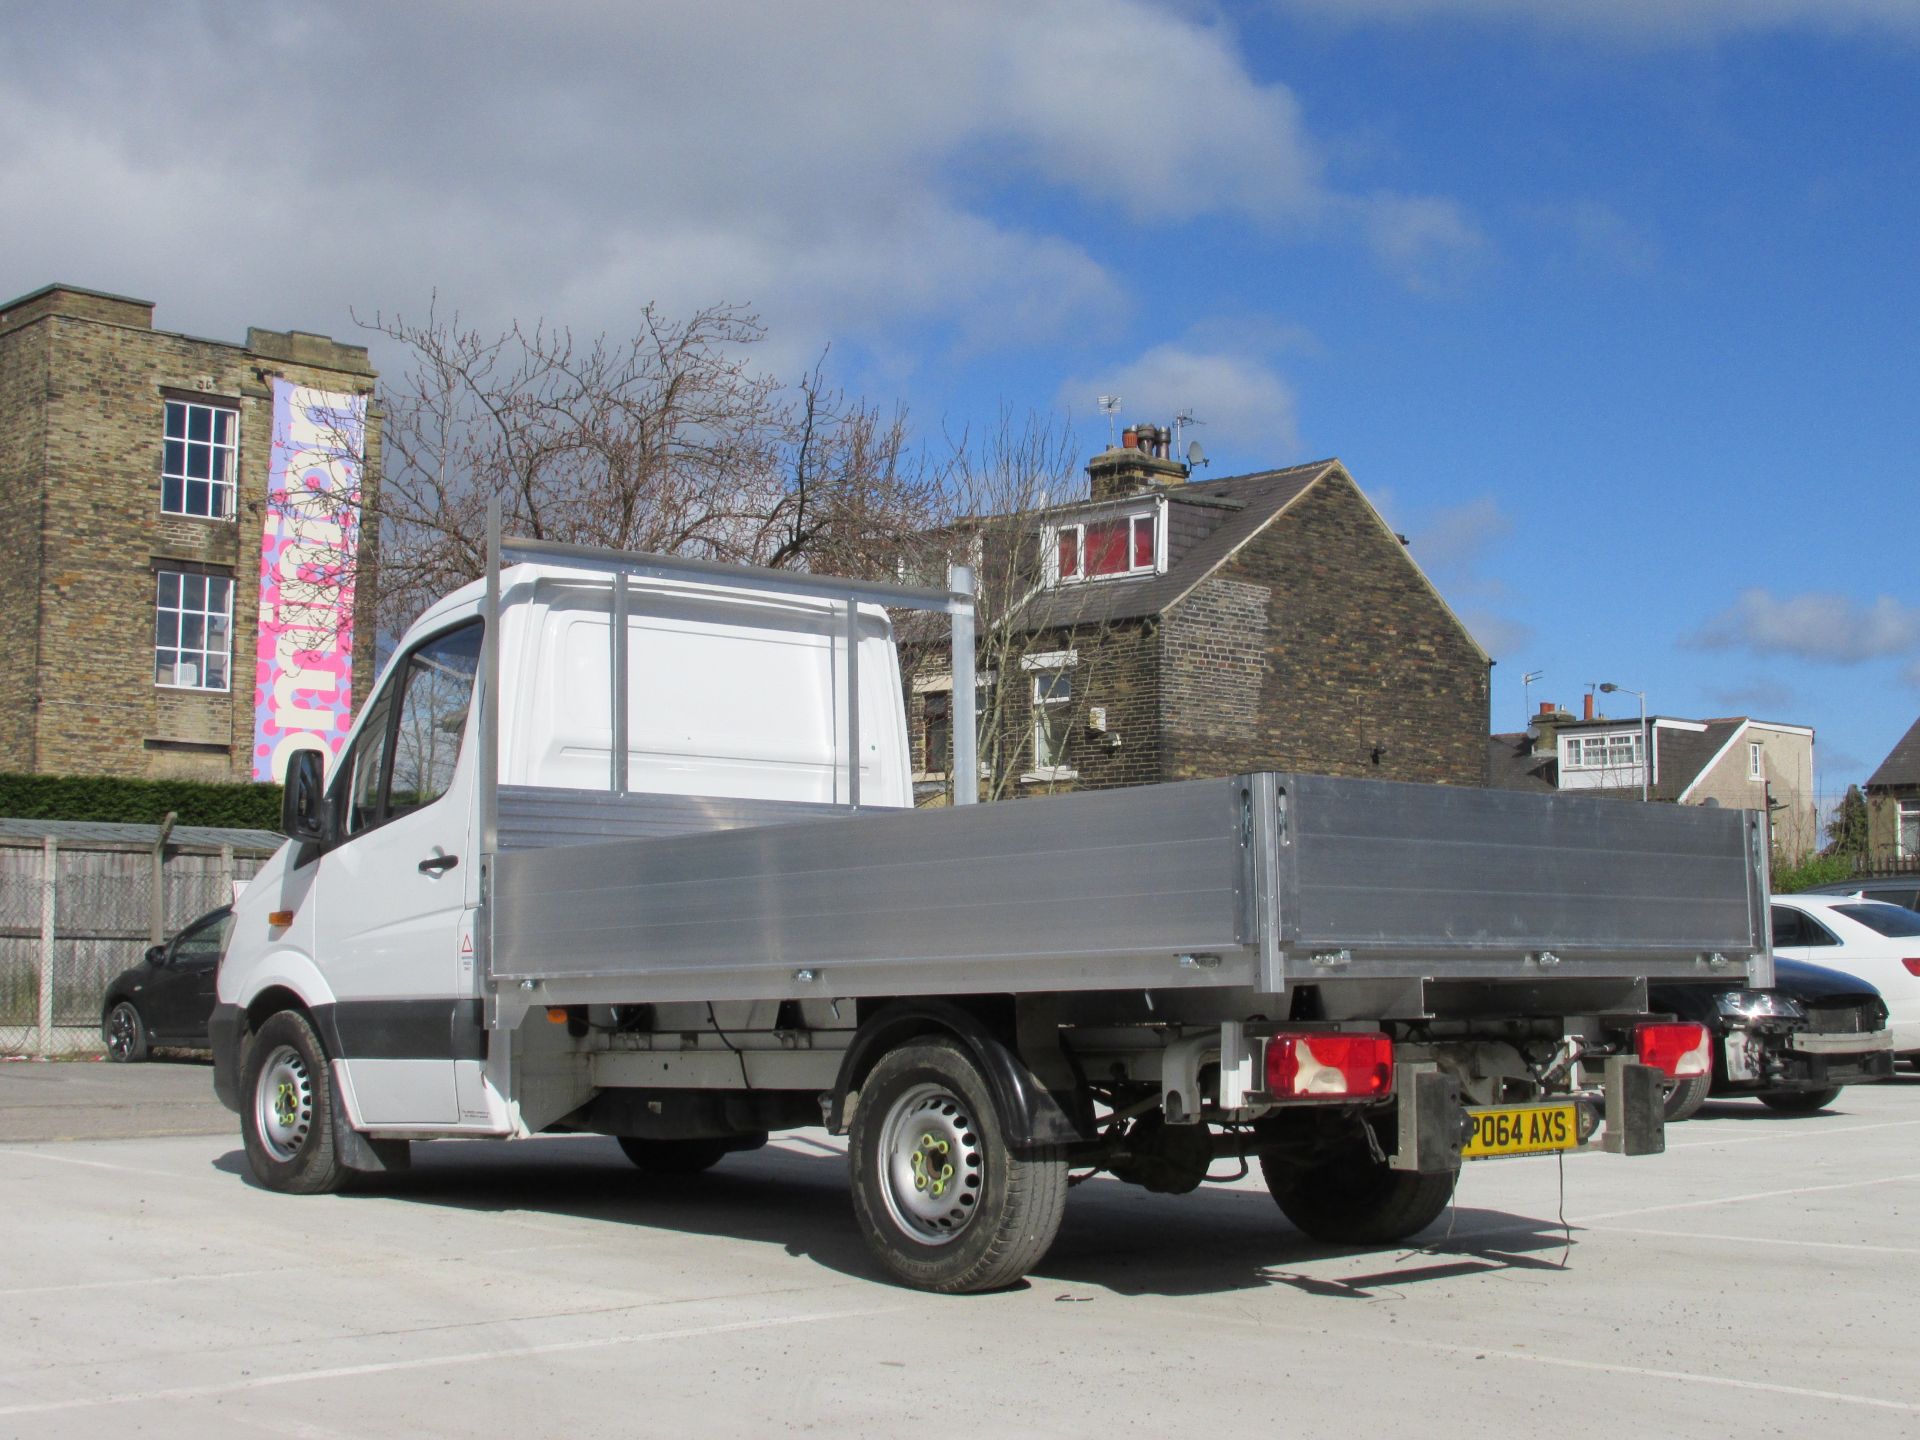 2014 Mercedes sprinter 313 Cdi dropside - 128630 Miles Warranted - Image 4 of 9